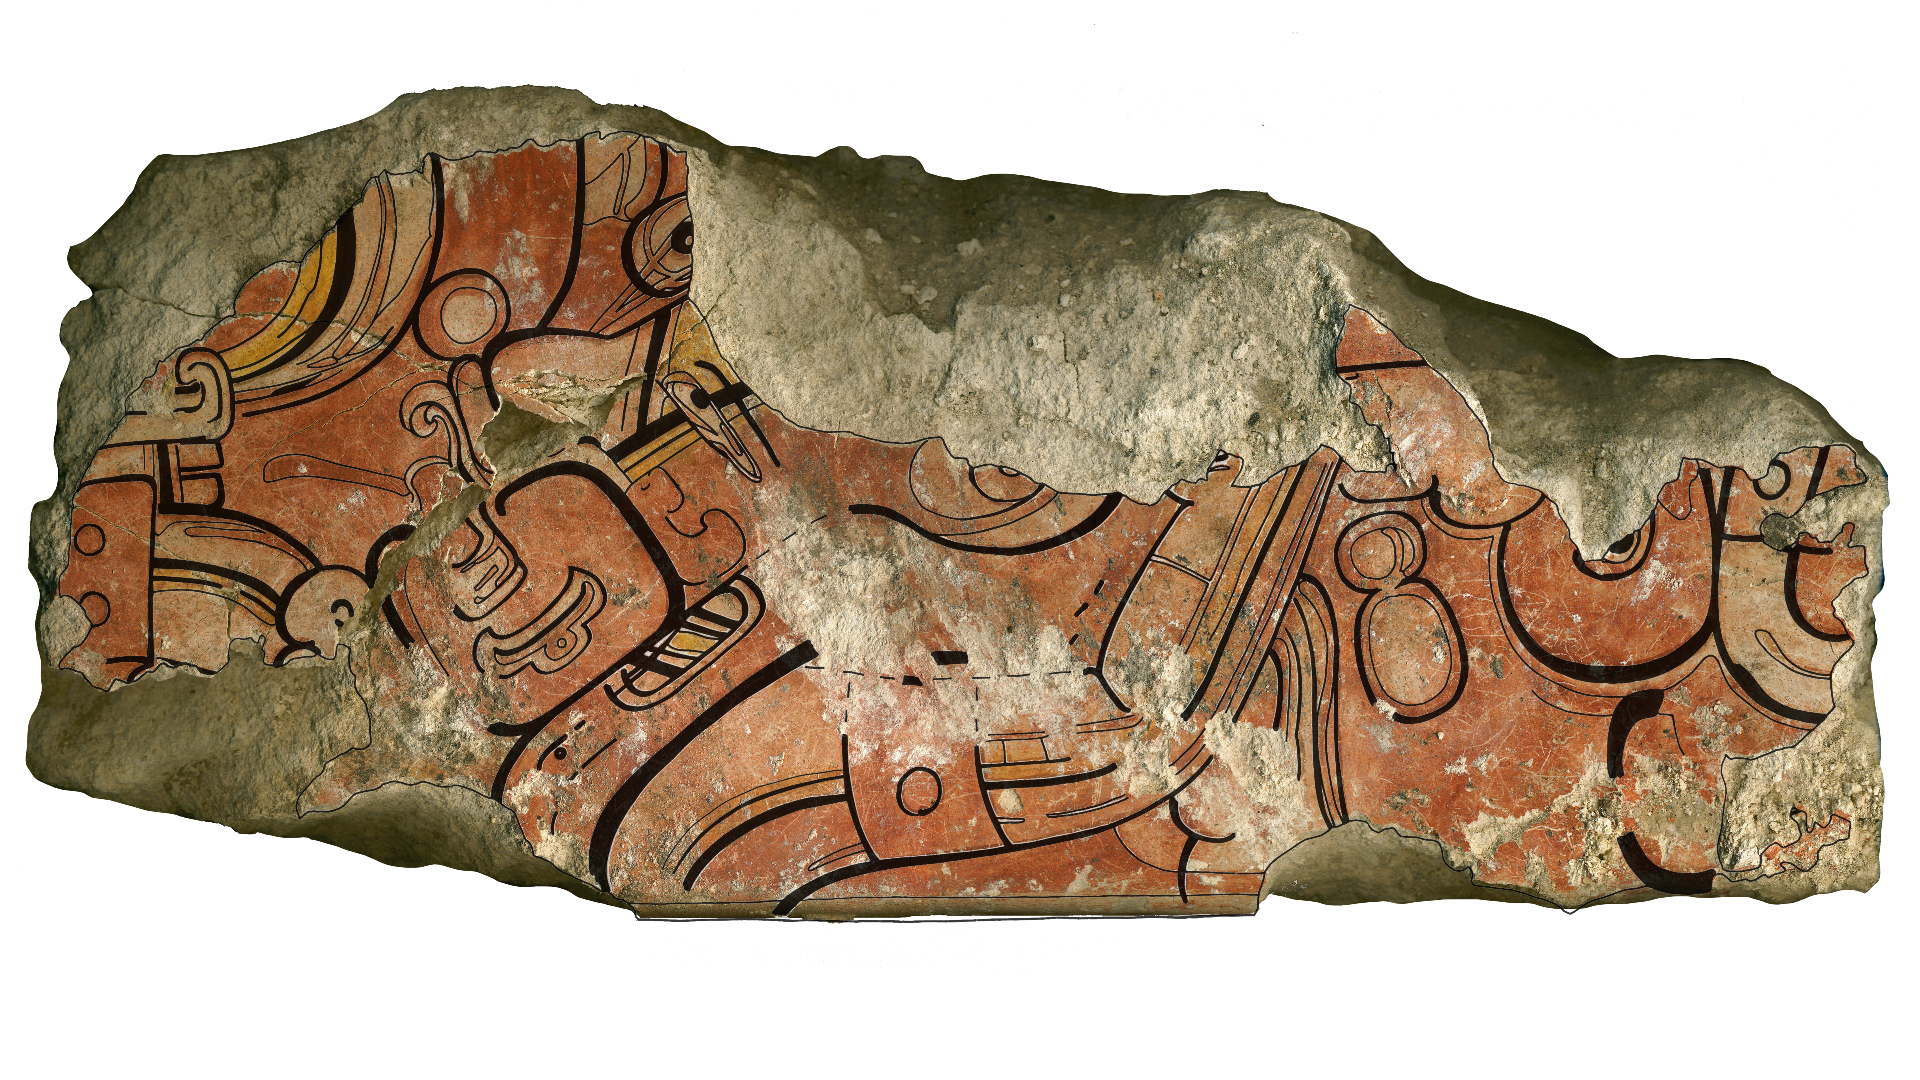 Wall painting fragments on masonry blocks associated with the Ixbalamque range structure. A mural fragment block collected from the Ixbalamque structure, Sub-V architectural phase (300-200 B.C.), fragment #6368 depicting the image of the Late Preclassic period Maya maize god.